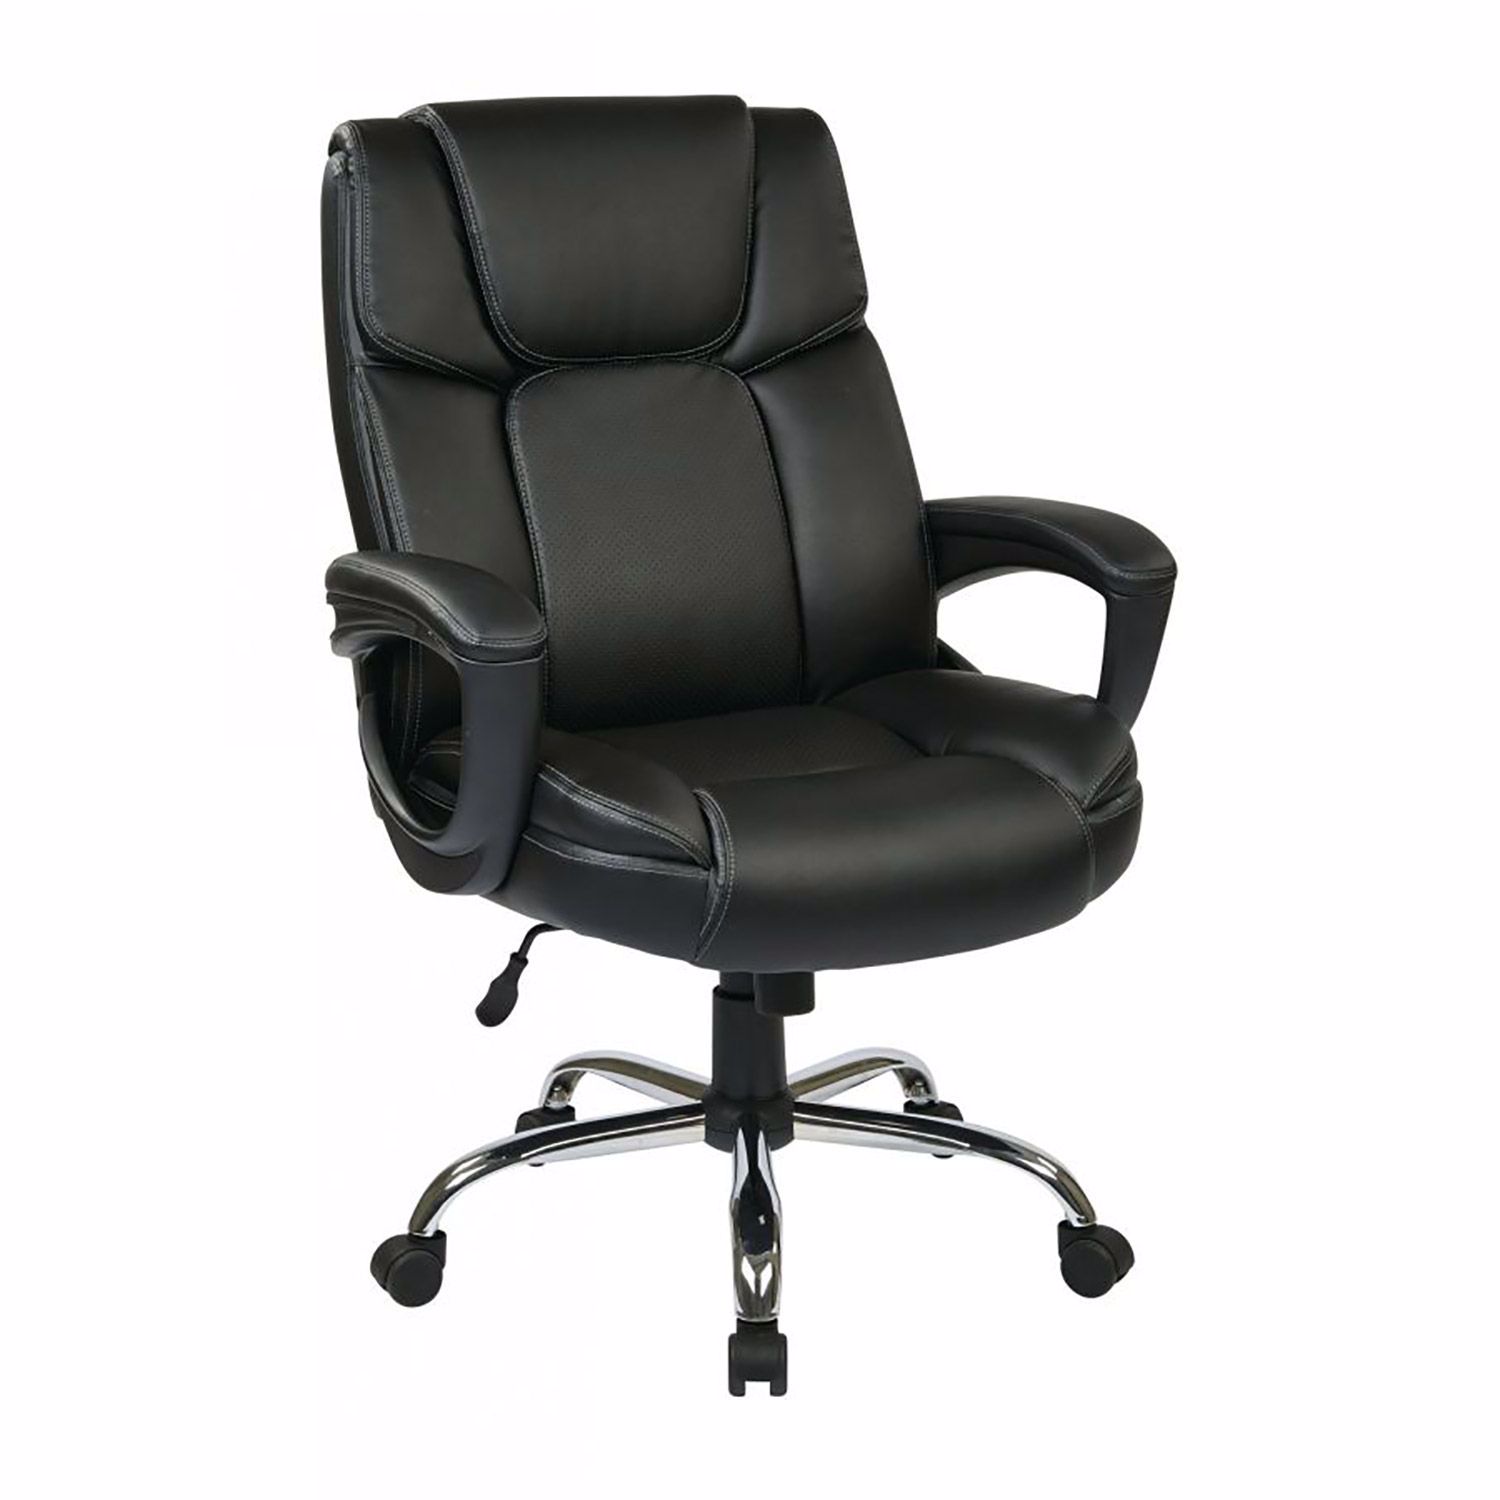 Mid-back Lumbar Support Office 600